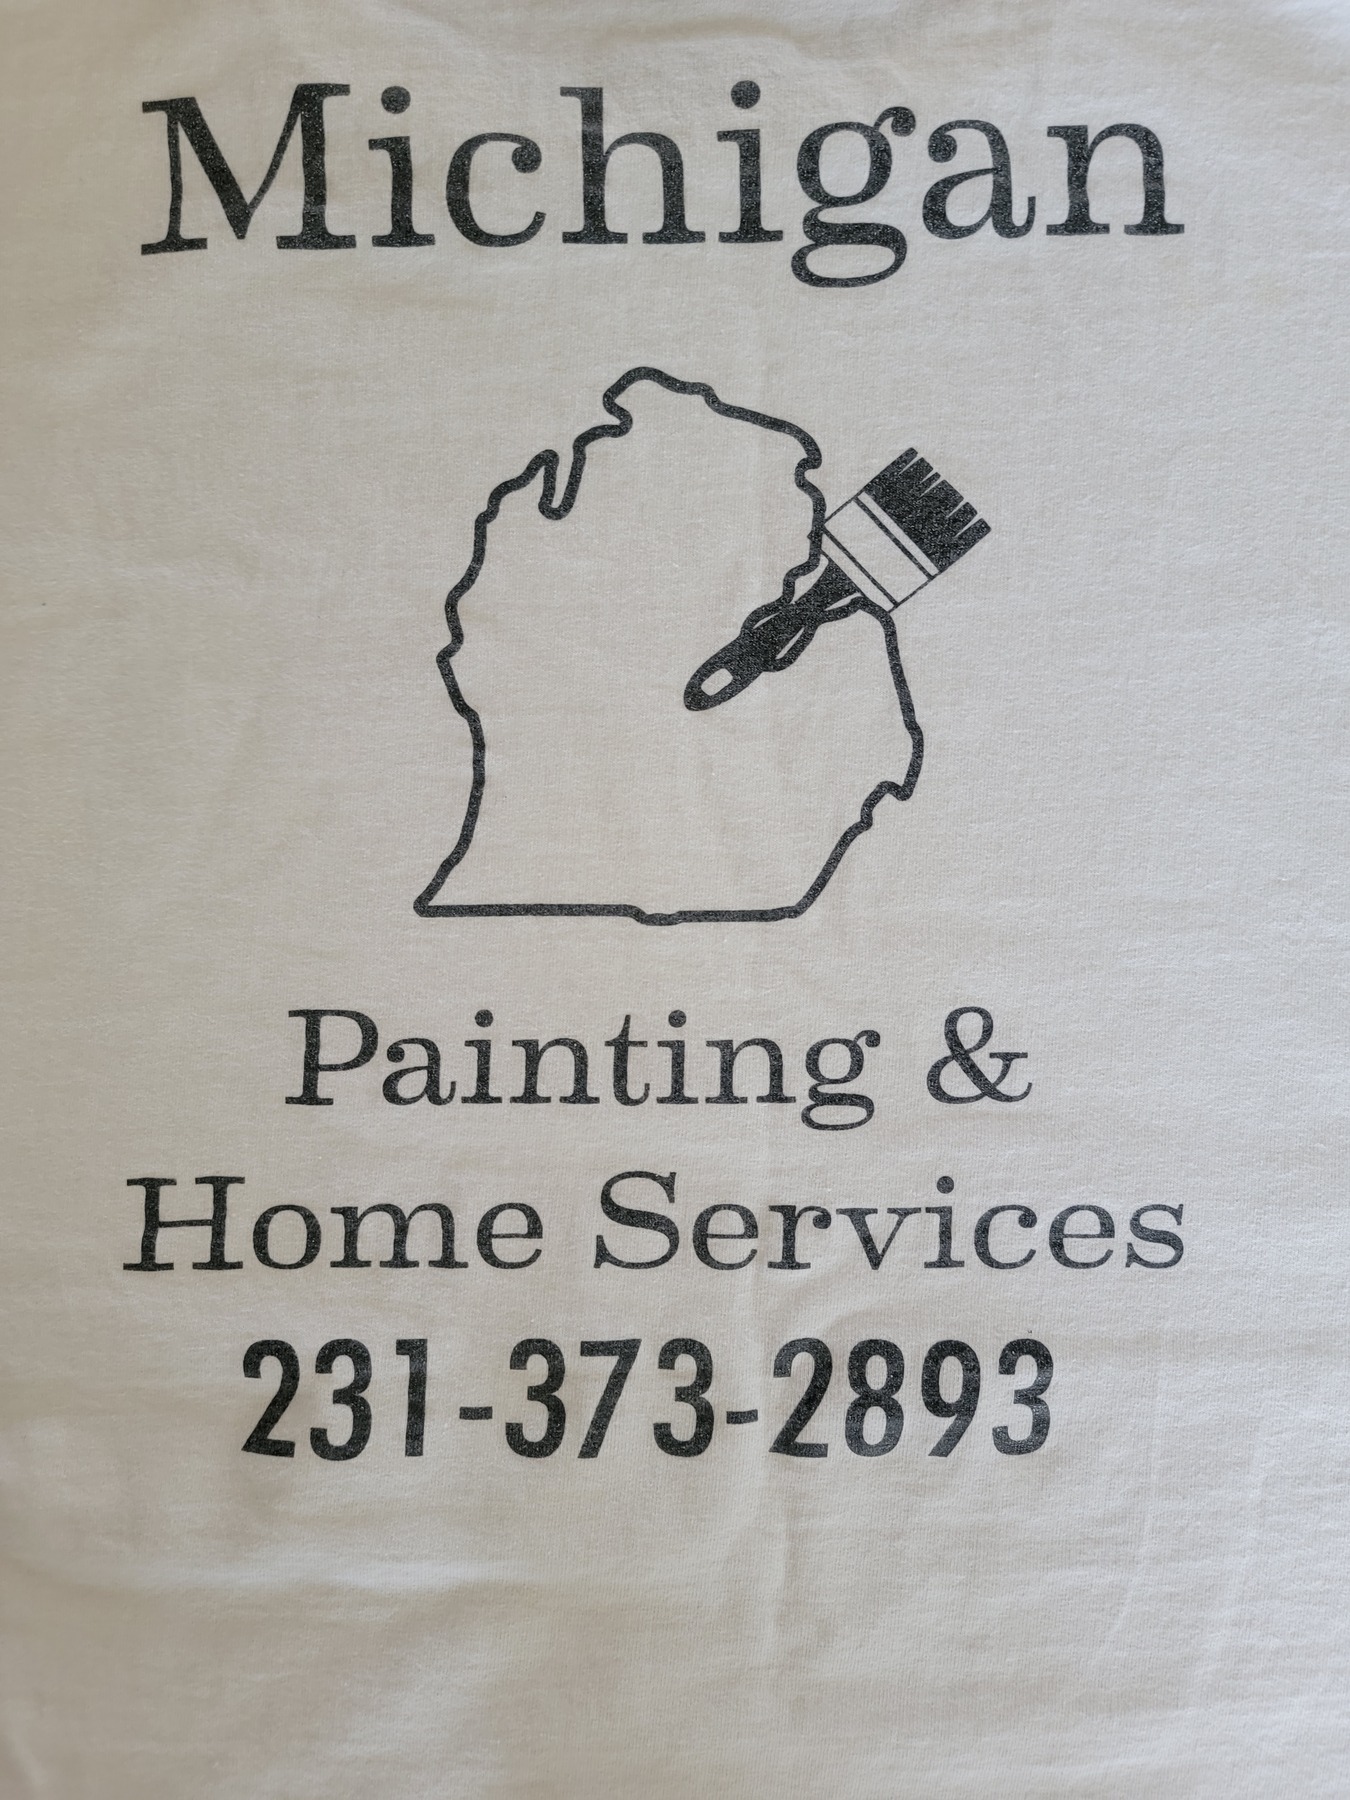 Michigan Painting & Home Services 6263 River St, Alanson Michigan 49706